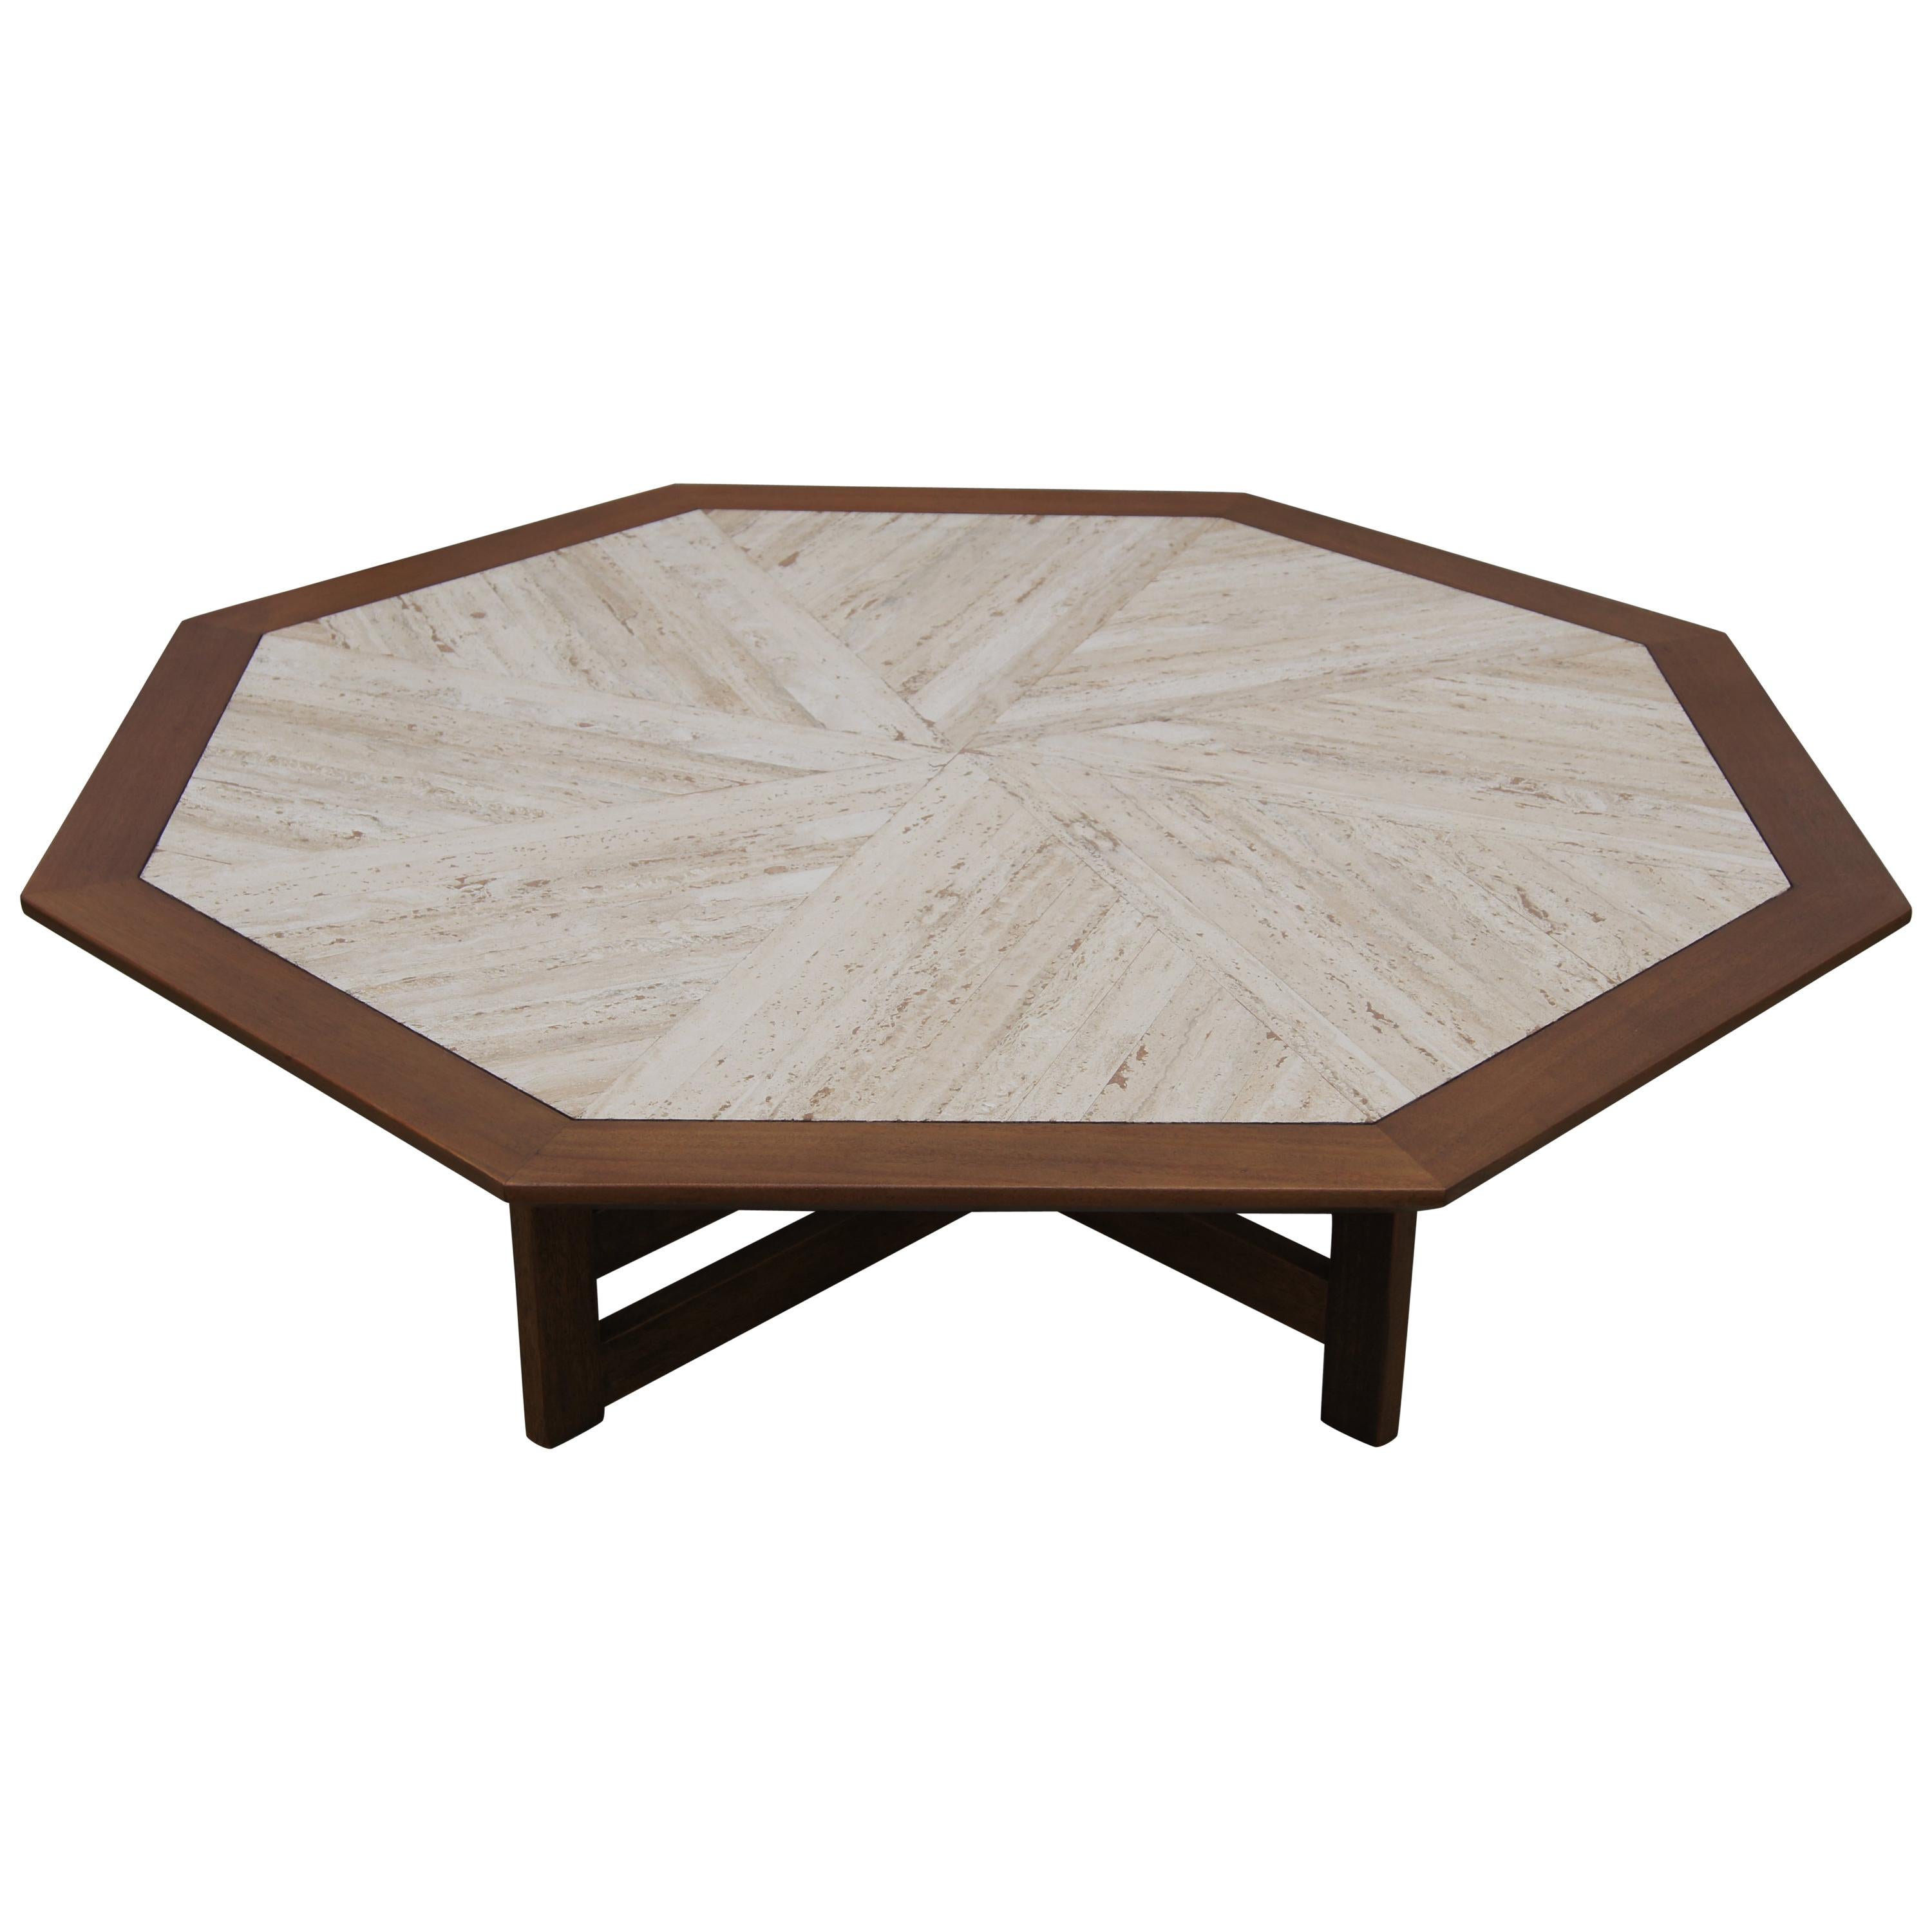 Octagonal Walnut and Travertine Coffee Table by Harvey Probber